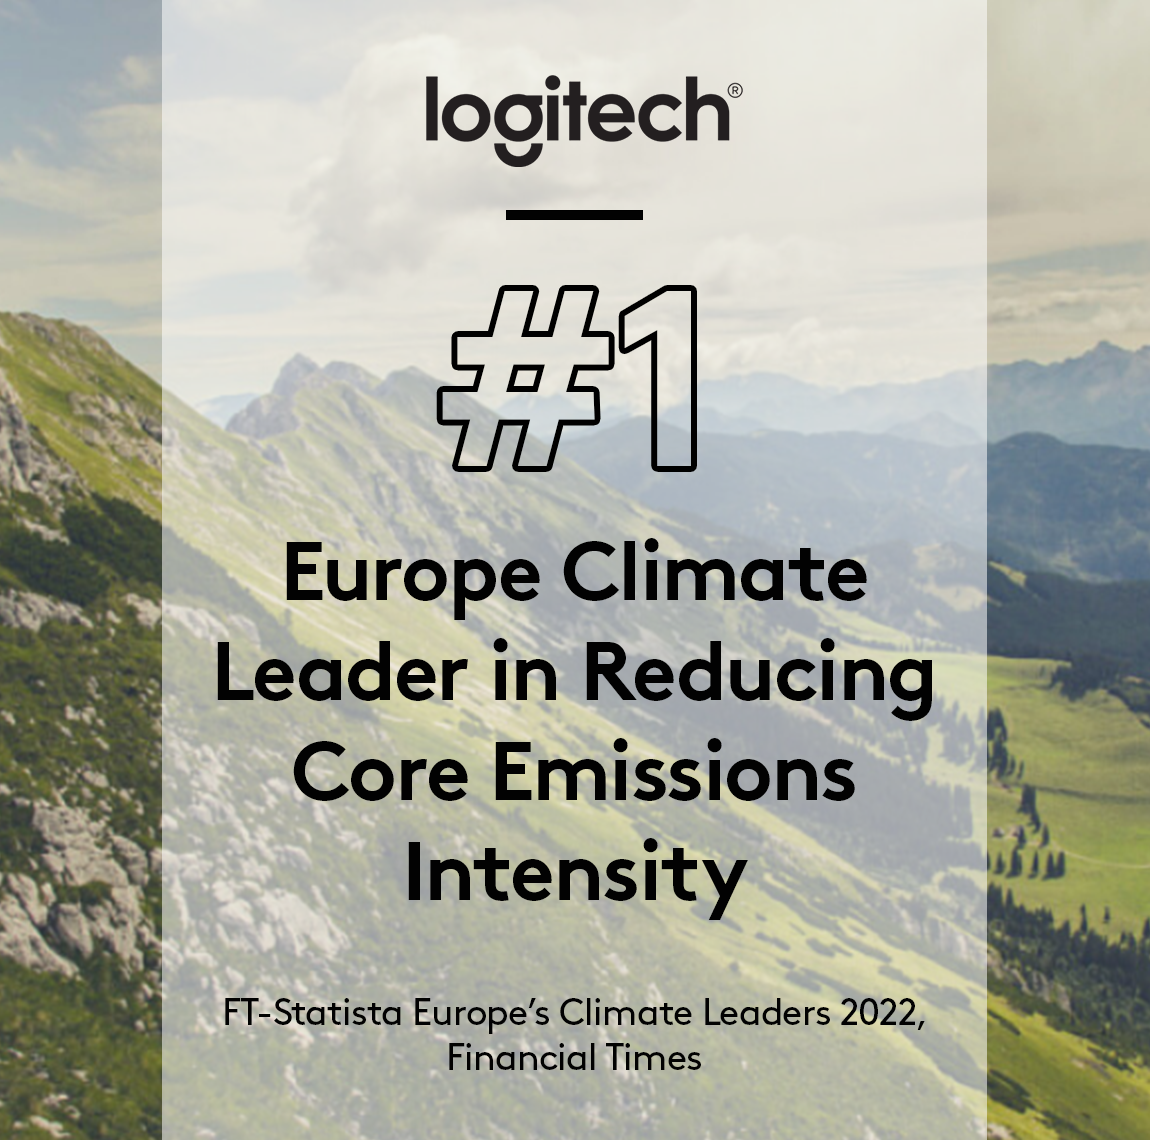 "Logitech: #1 Europe Climate Leader in Reducing Core Emissions Intensity" over mountain landscapeland